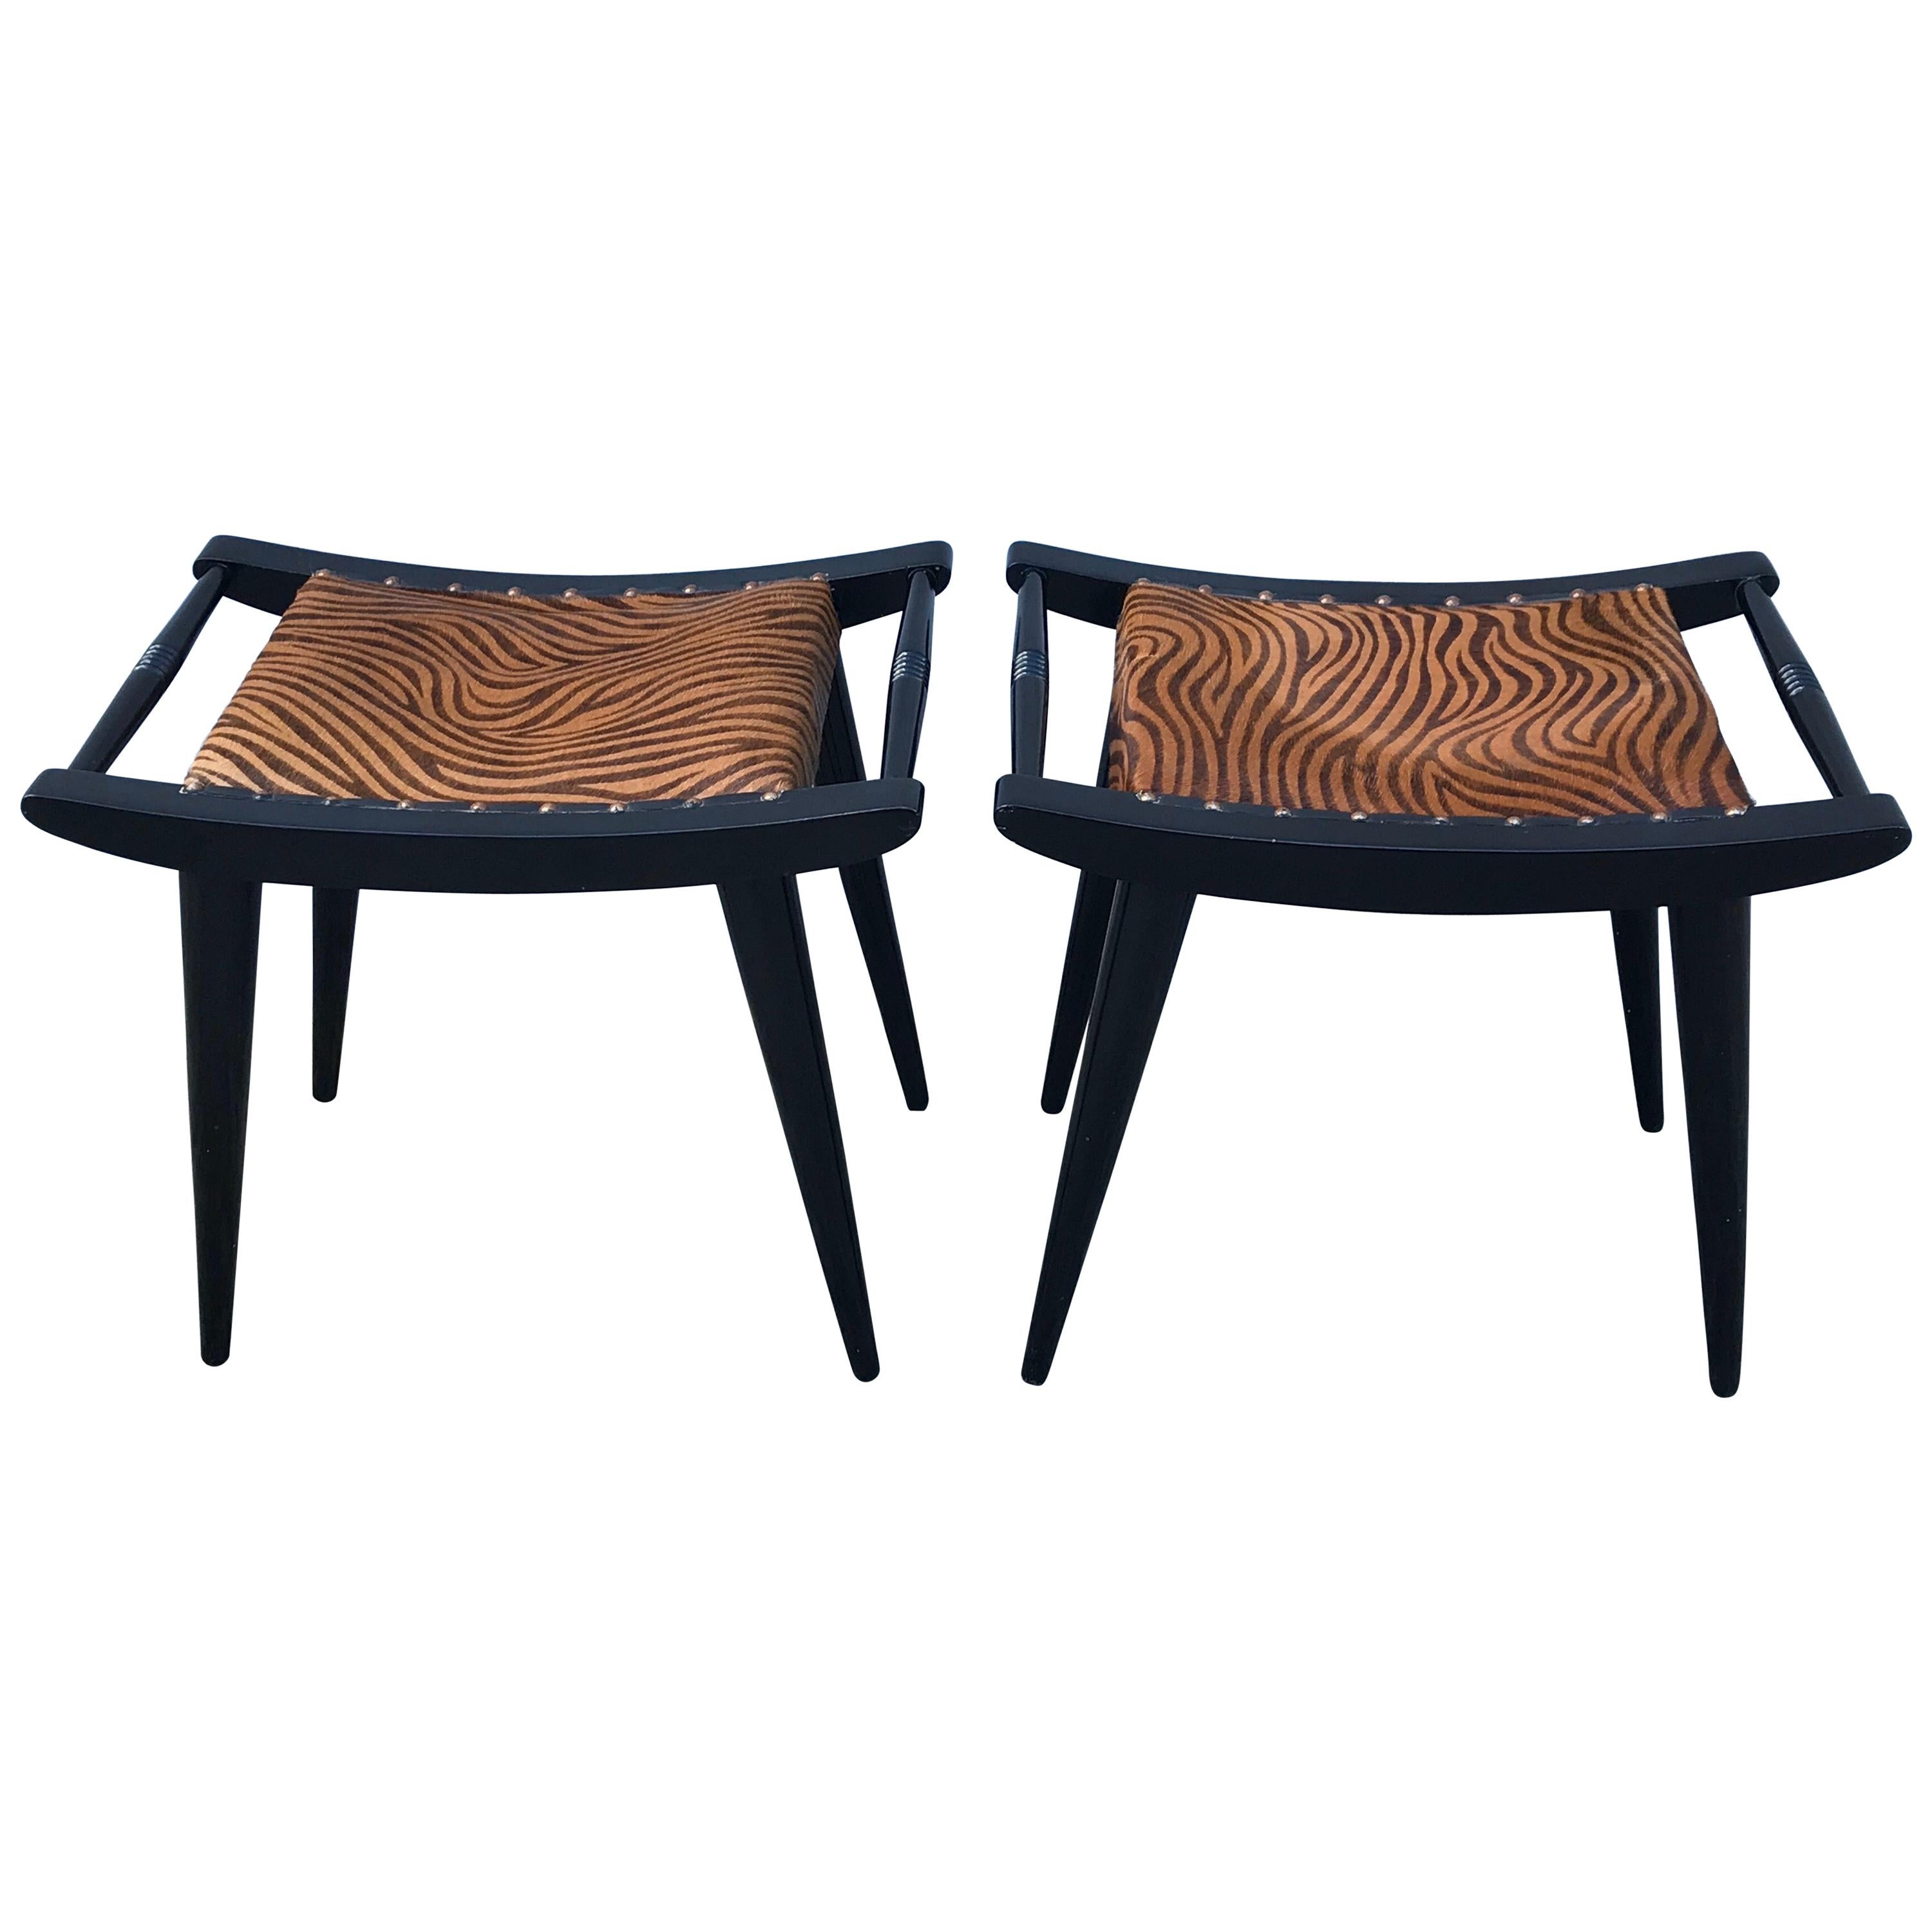 Pair of Art Deco Black Lacquered Zebra Printed Calf Hair Side Stools, 1930's For Sale